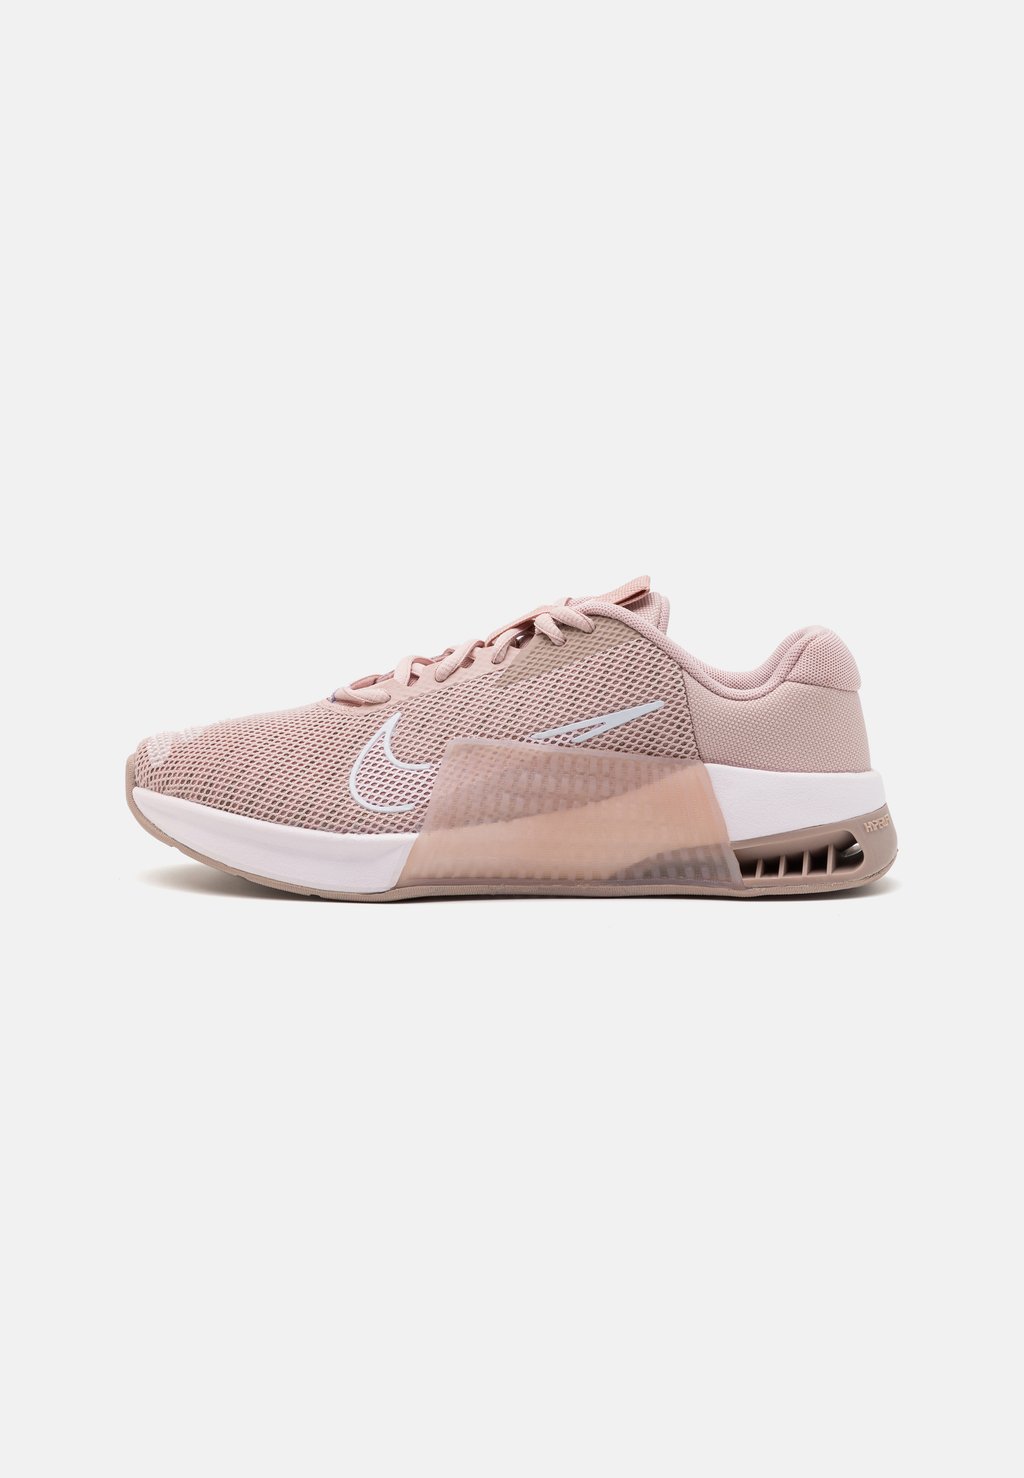 Кроссовки METCON 9 Nike, цвет pink oxford/white/diffused taupe/pearl pink freshwater pearl white button pearl aaa pink purple white button pearl